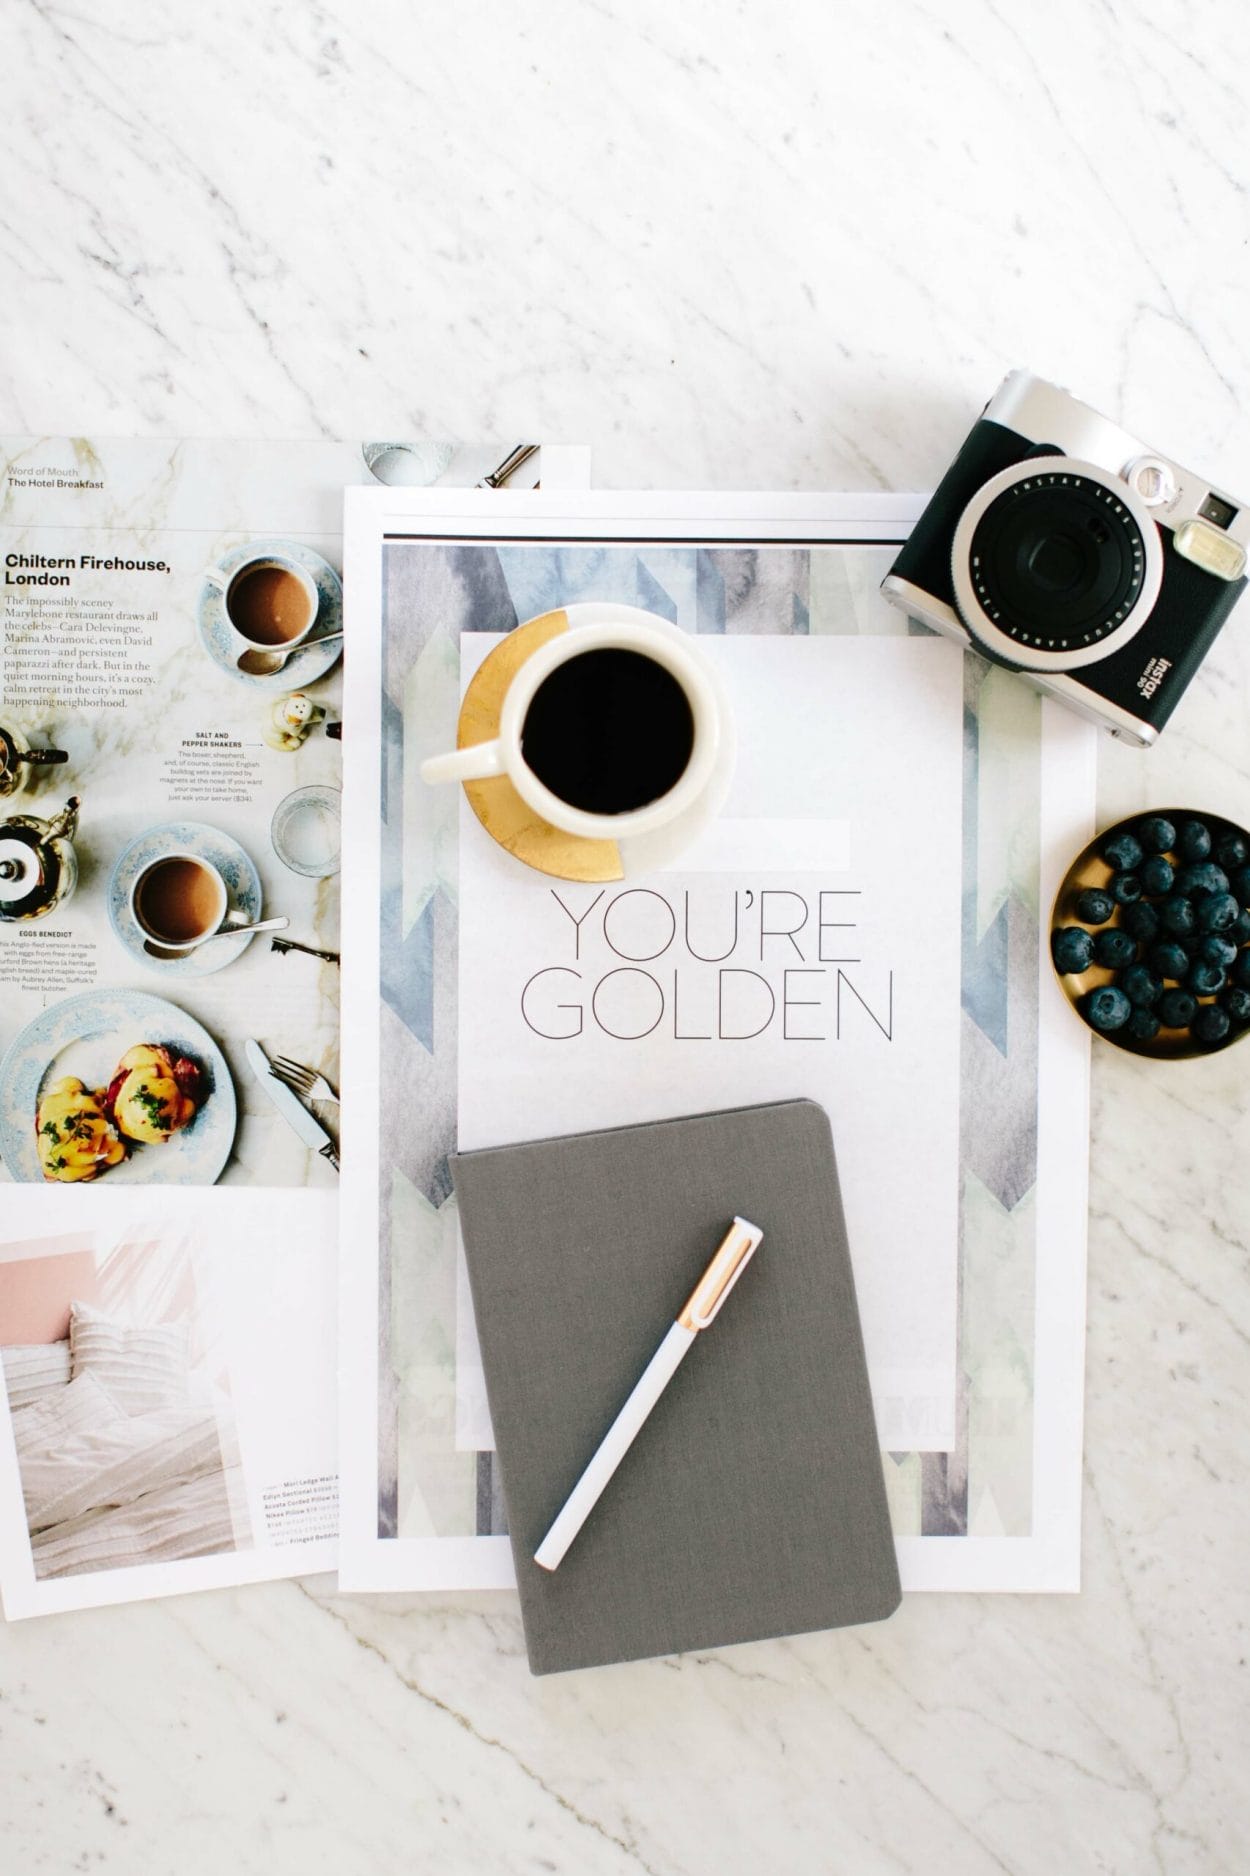  Flatlay featuring a modern black and white coffee cup with the text "Your Golden Quote" and assorted magazines.